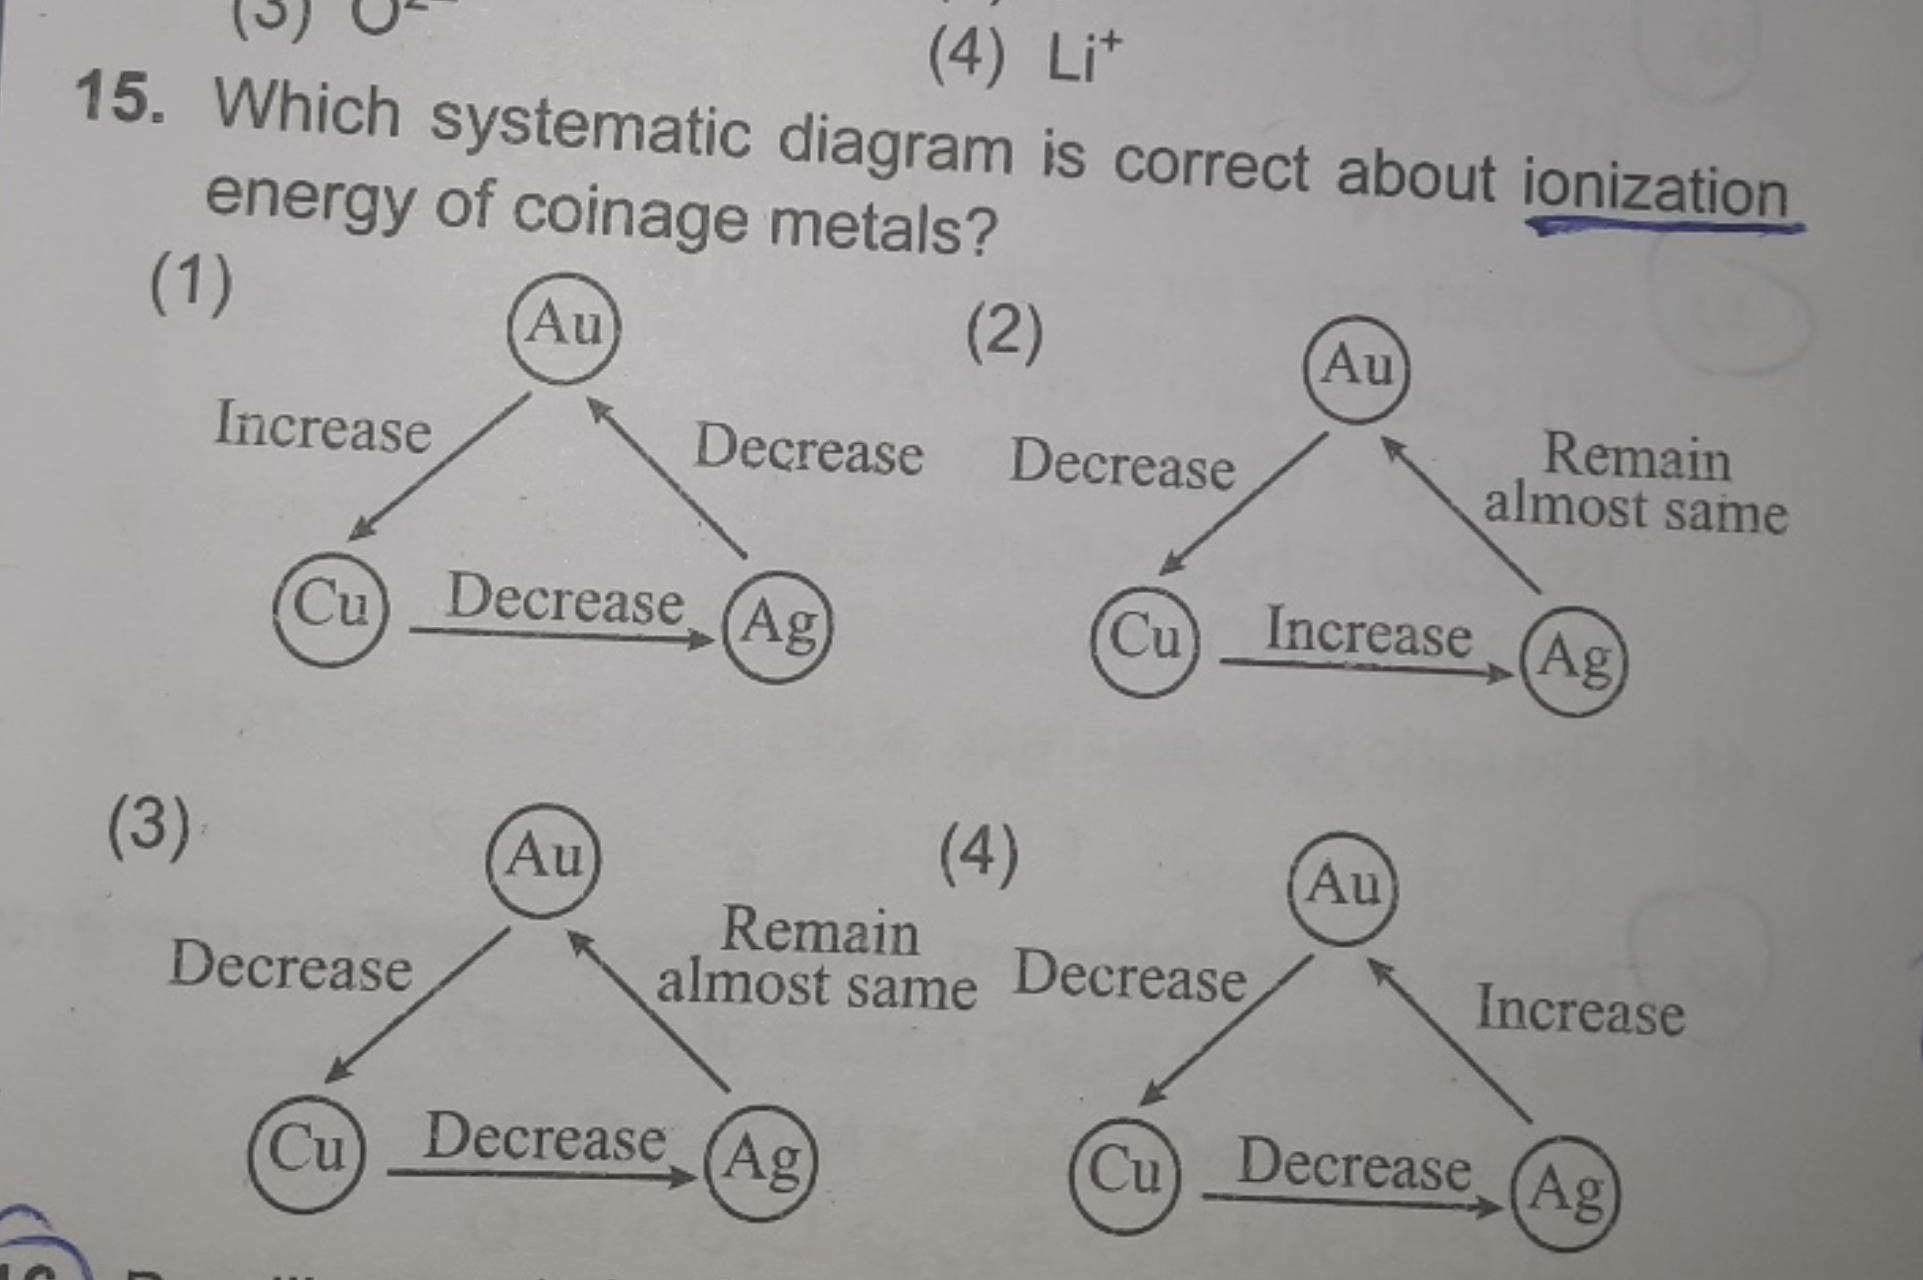 15. Which systematic diagram is correct about ionization energy of coi